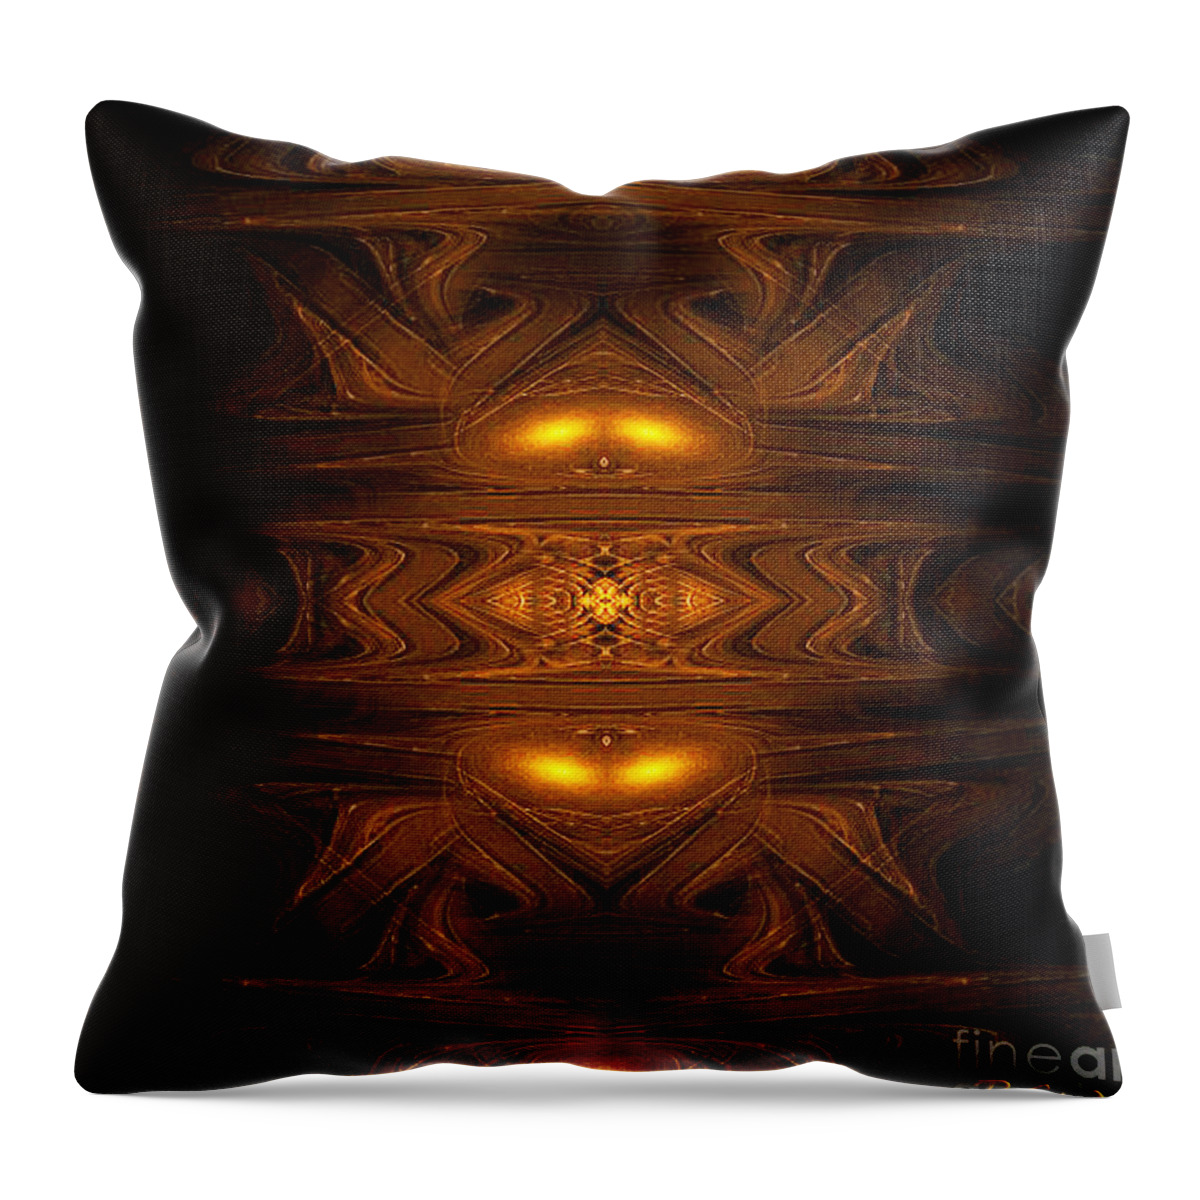 Ancient Alien Jukebox Throw Pillow featuring the digital art Ancient alien jukebox - abstract art by Giada Rossi by Giada Rossi